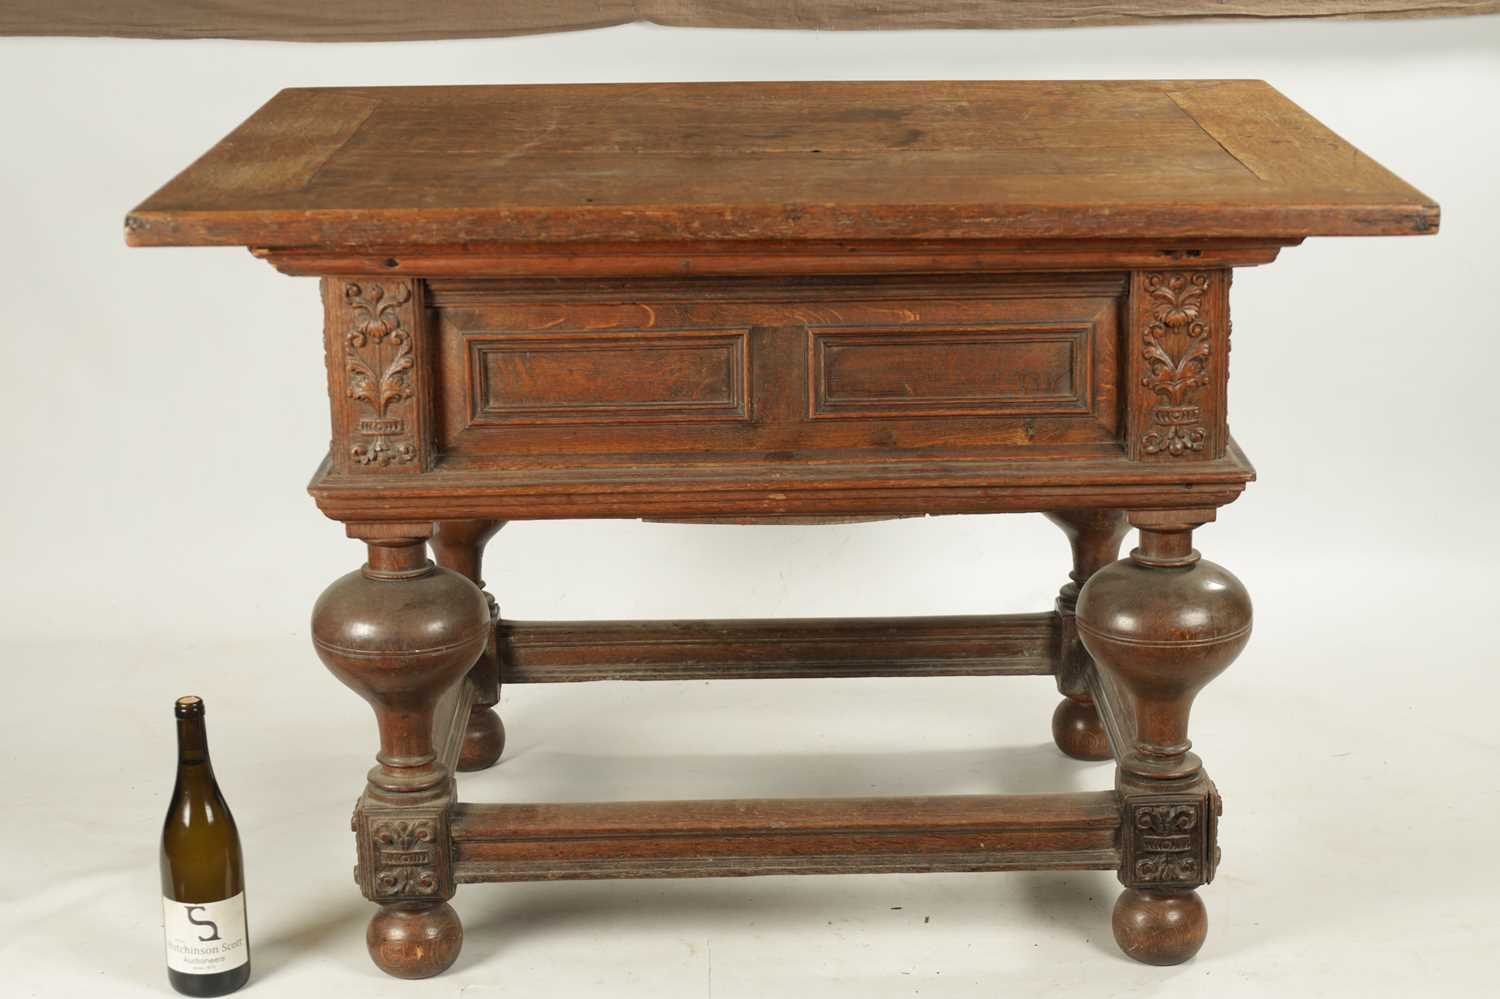 AN 18TH CENTURY FLEMISH OAK TABLE - Image 6 of 7